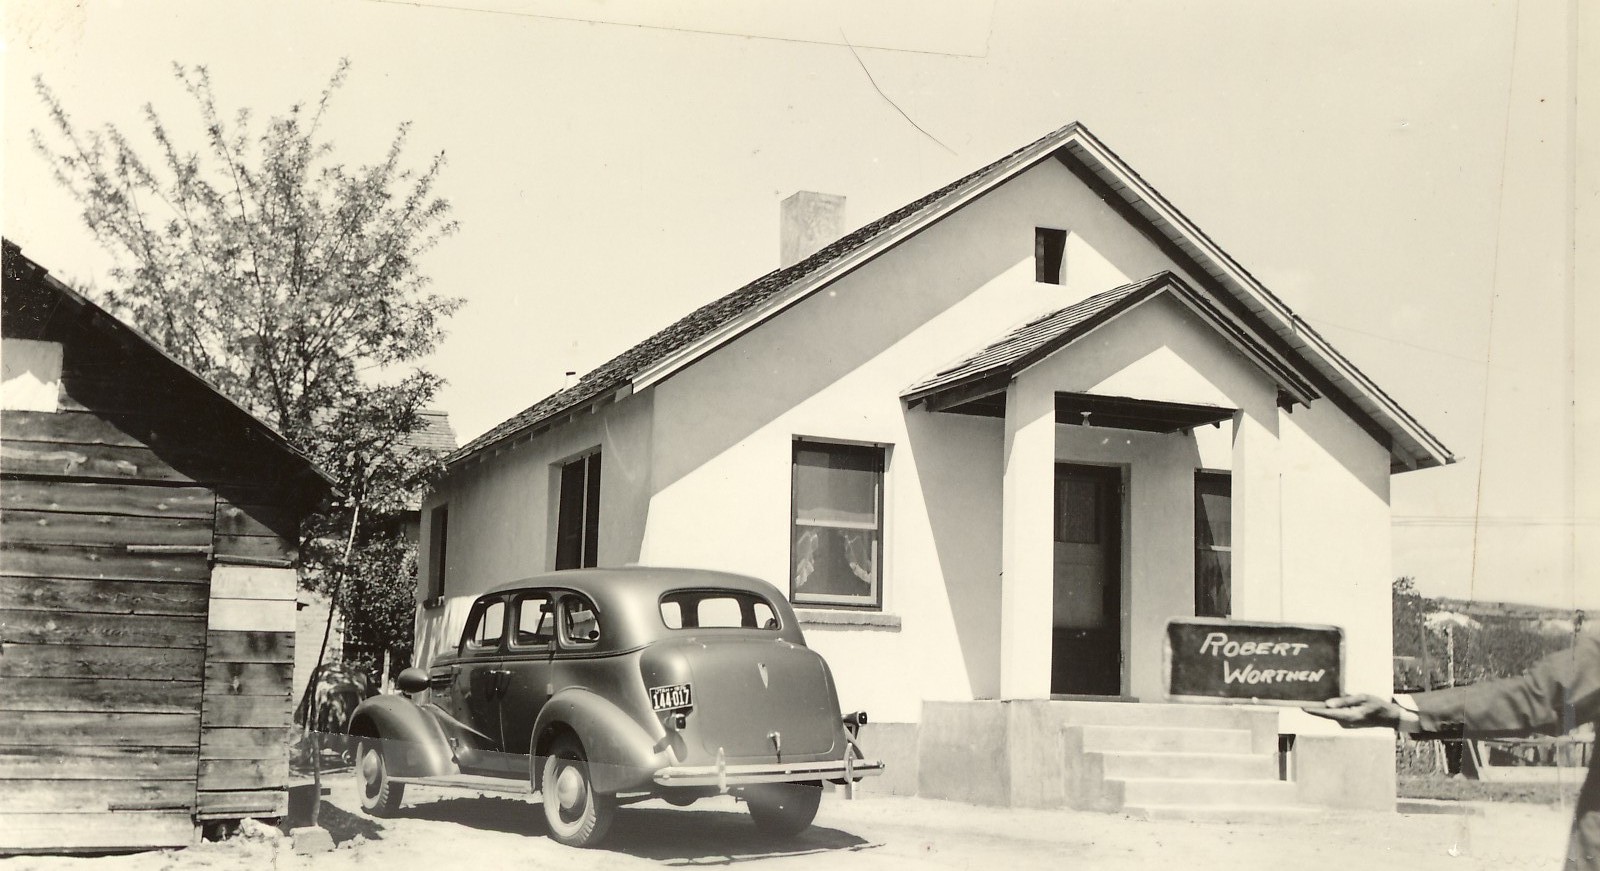 Photo of the Robert Worthen home at 82 West 300 South in St George